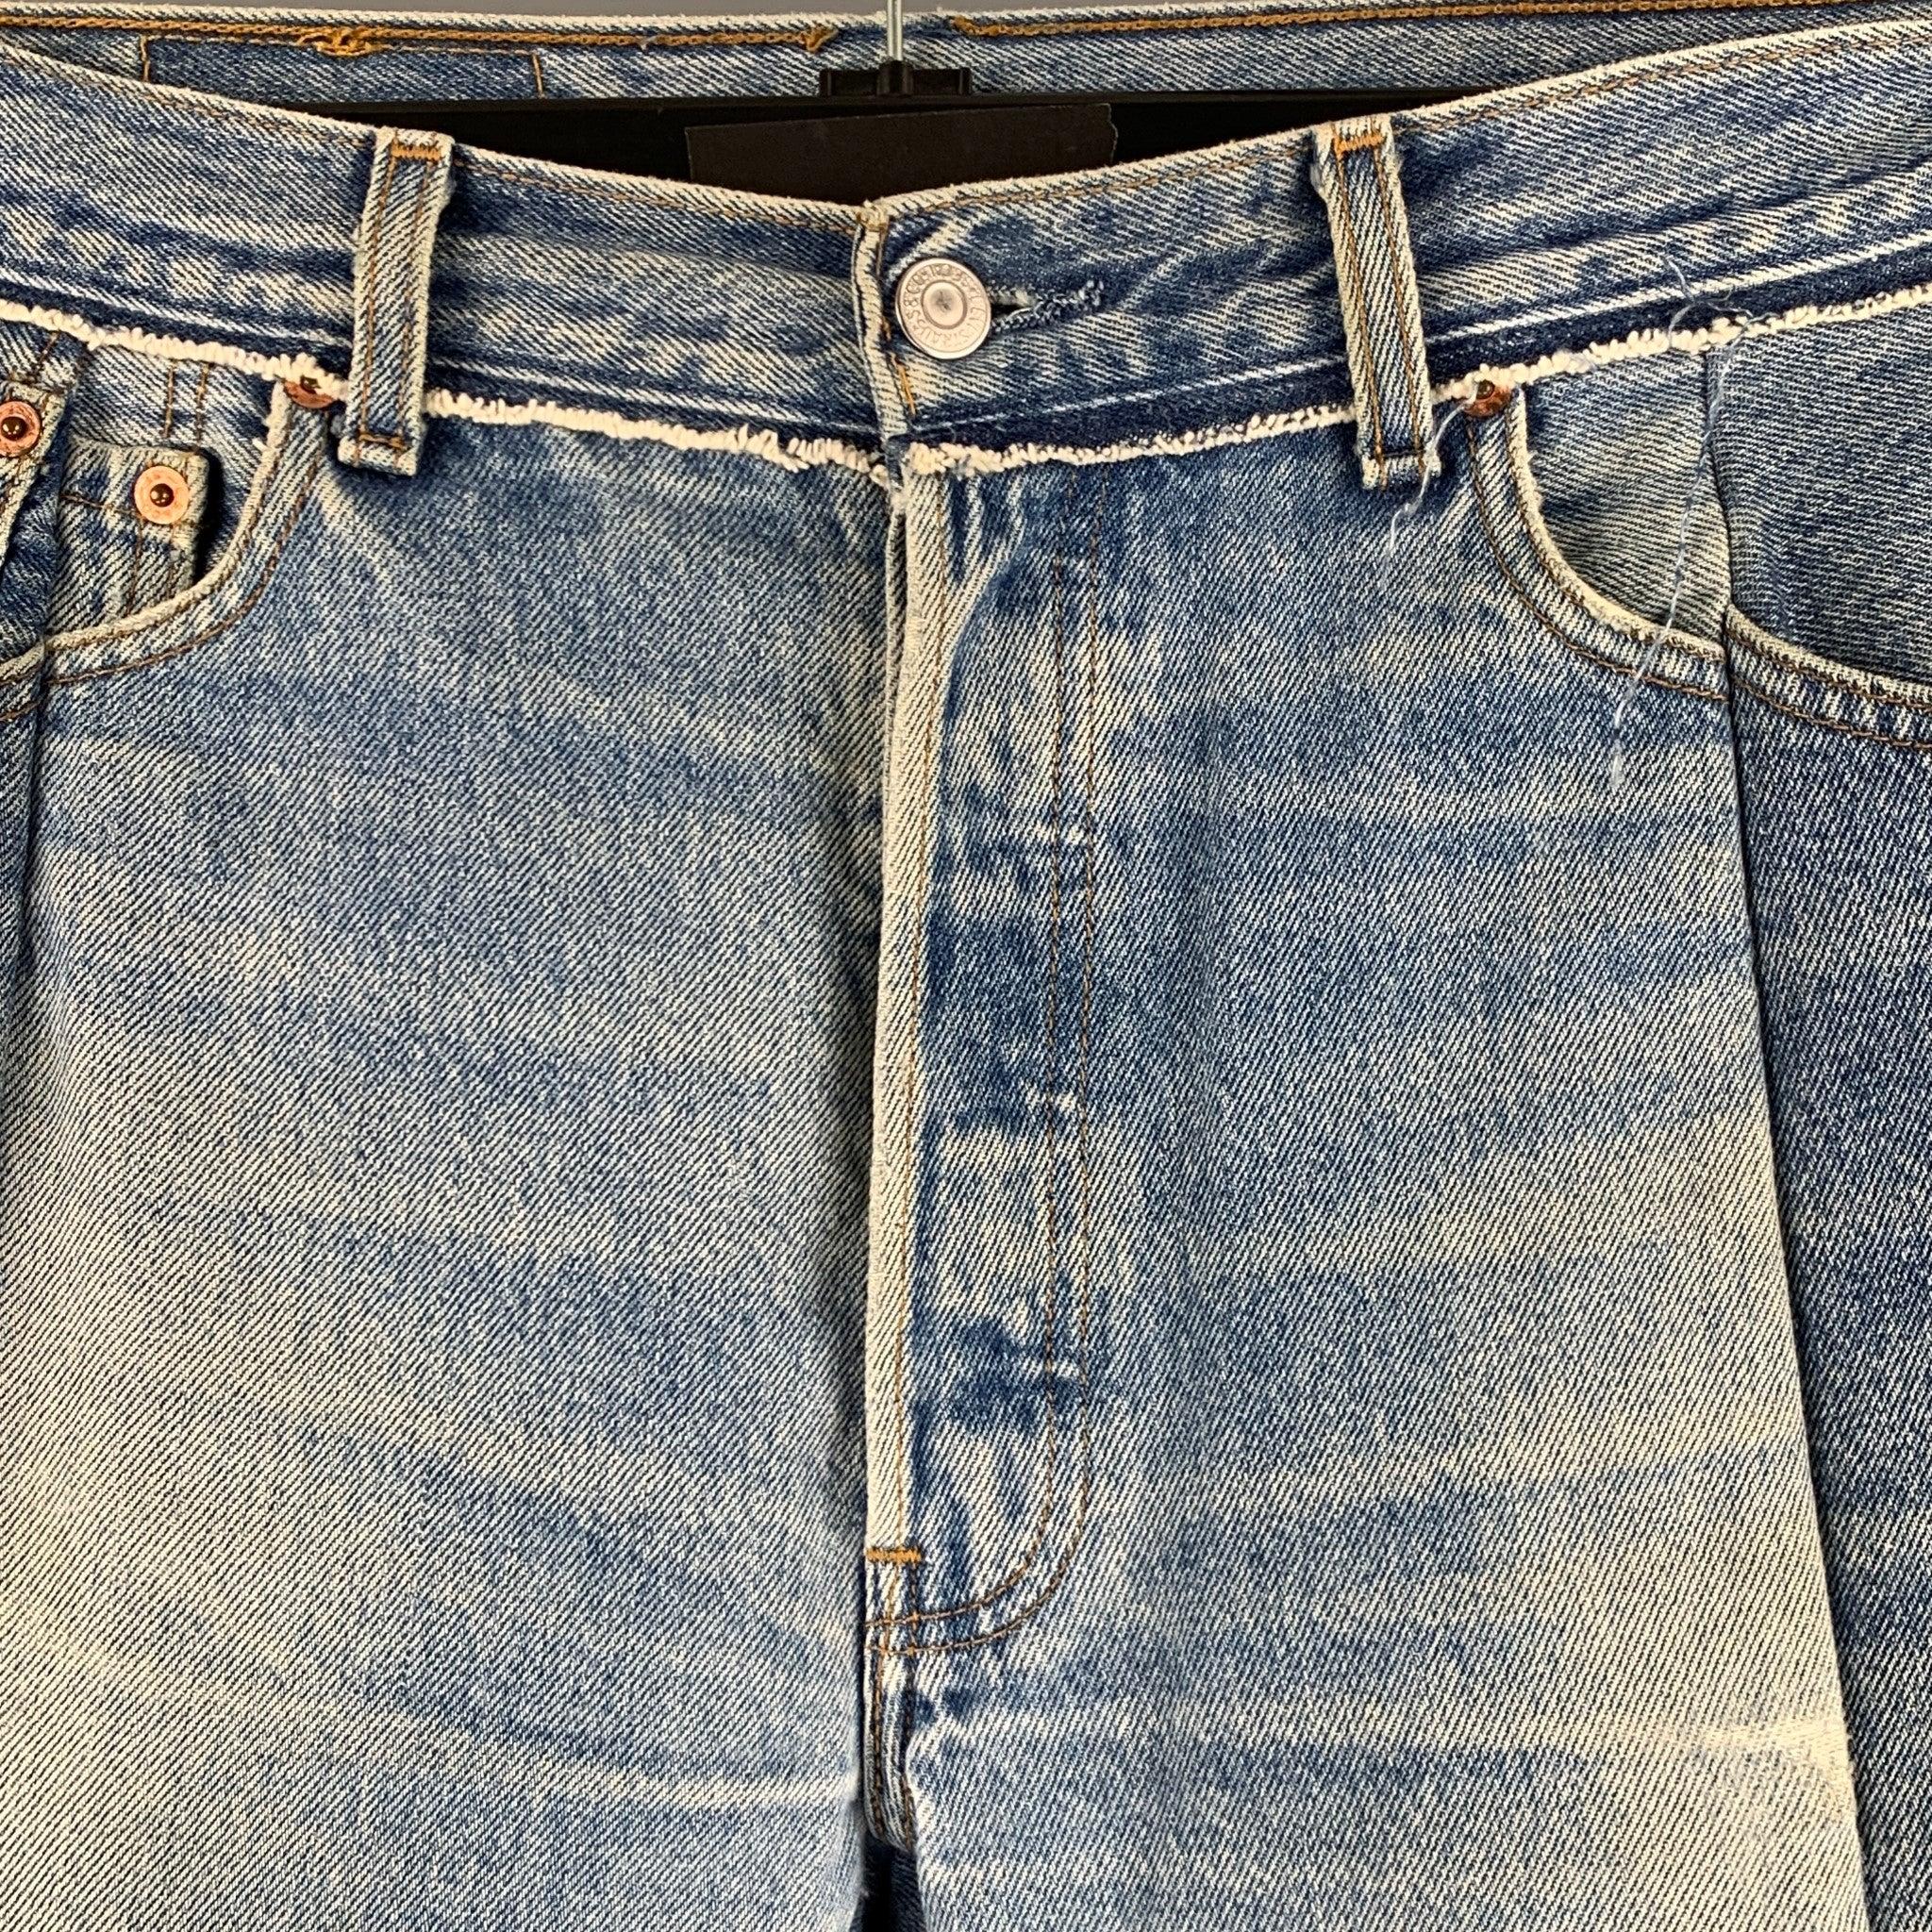 VETEMENTS x LEVI STRAUSS jeans comes in a blue denim featuring a regular fit, distressed detailing, and button fly closure.Excellent Pre-Owned Condition. 

Marked:   L 

Measurements: 
  Waist: 30 inches  Rise: 9.5 inches  Inseam: 28 inches 
 
  
 